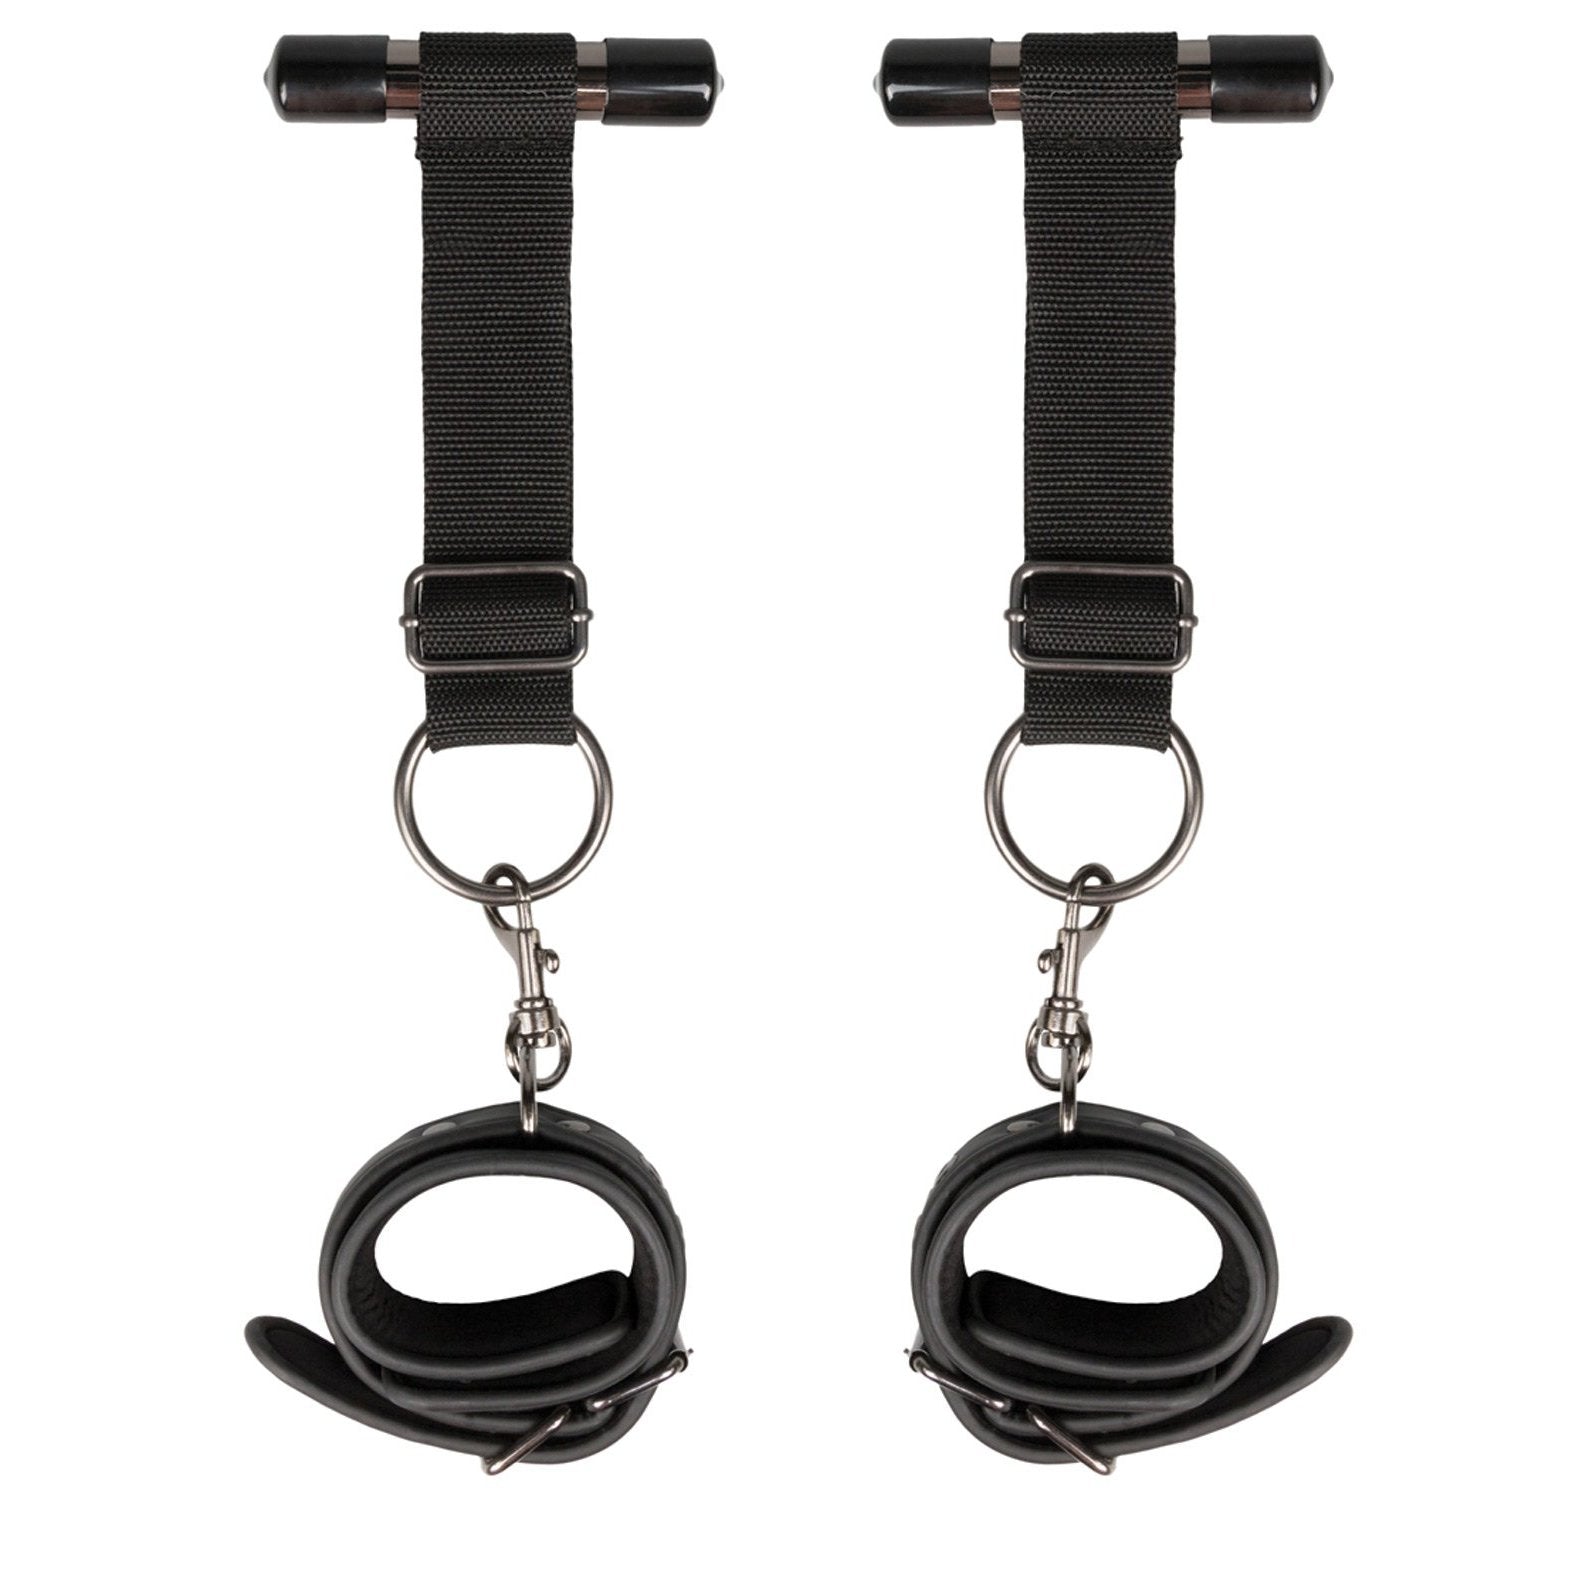 Easy Toys Over The Door Wrist Cuffs